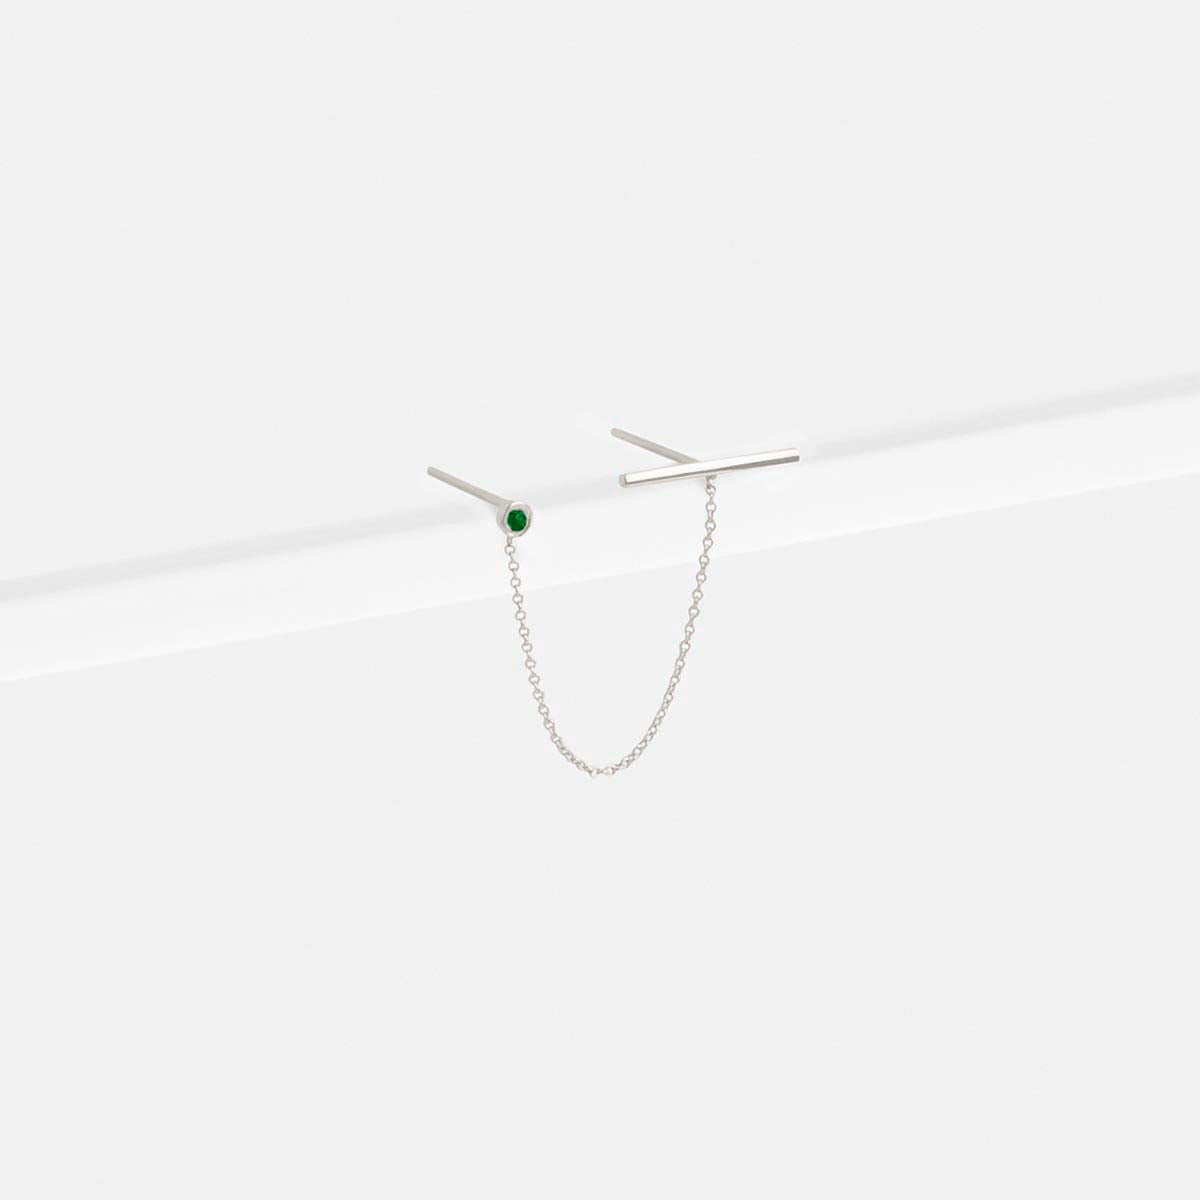 Nusu Minimal Double Piercing Earring in 14k White Gold set with Emerald By SHW Fine Jewelry NYC